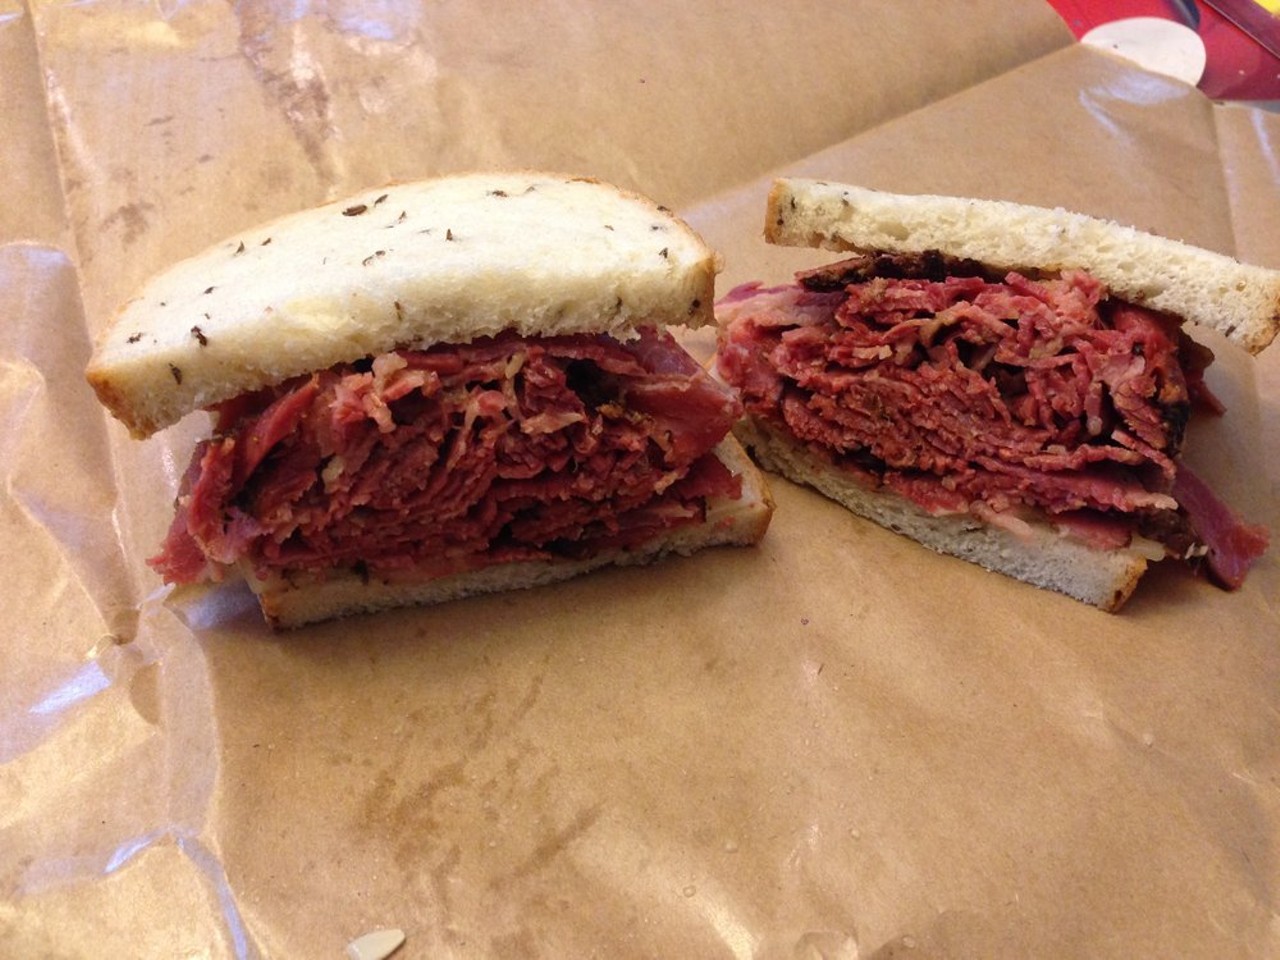 Mister Brisket | 2156 S. Taylor Rd, Cleveland Heights 44118 | 216-932-8620 | Delivery charge varies, will not exceed $5
Mister Brisket, a family owned carry out sandwich shop and deli, continues to be in the conversation for the best corned beef and pastrami in Cleveland. Order on a Tuesday and get $1 off any large sandwich. Sadly, Mister Brisket only offers lunch delivery but Mister Brisket's  boxed lunches include a sandwich (scooby, large or extra-large), chips, cookie, pickle and a drink. Mister Brisket's hours vary so always check the website before ordering. (Photo courtesy of Yelp! user Jeev D.)